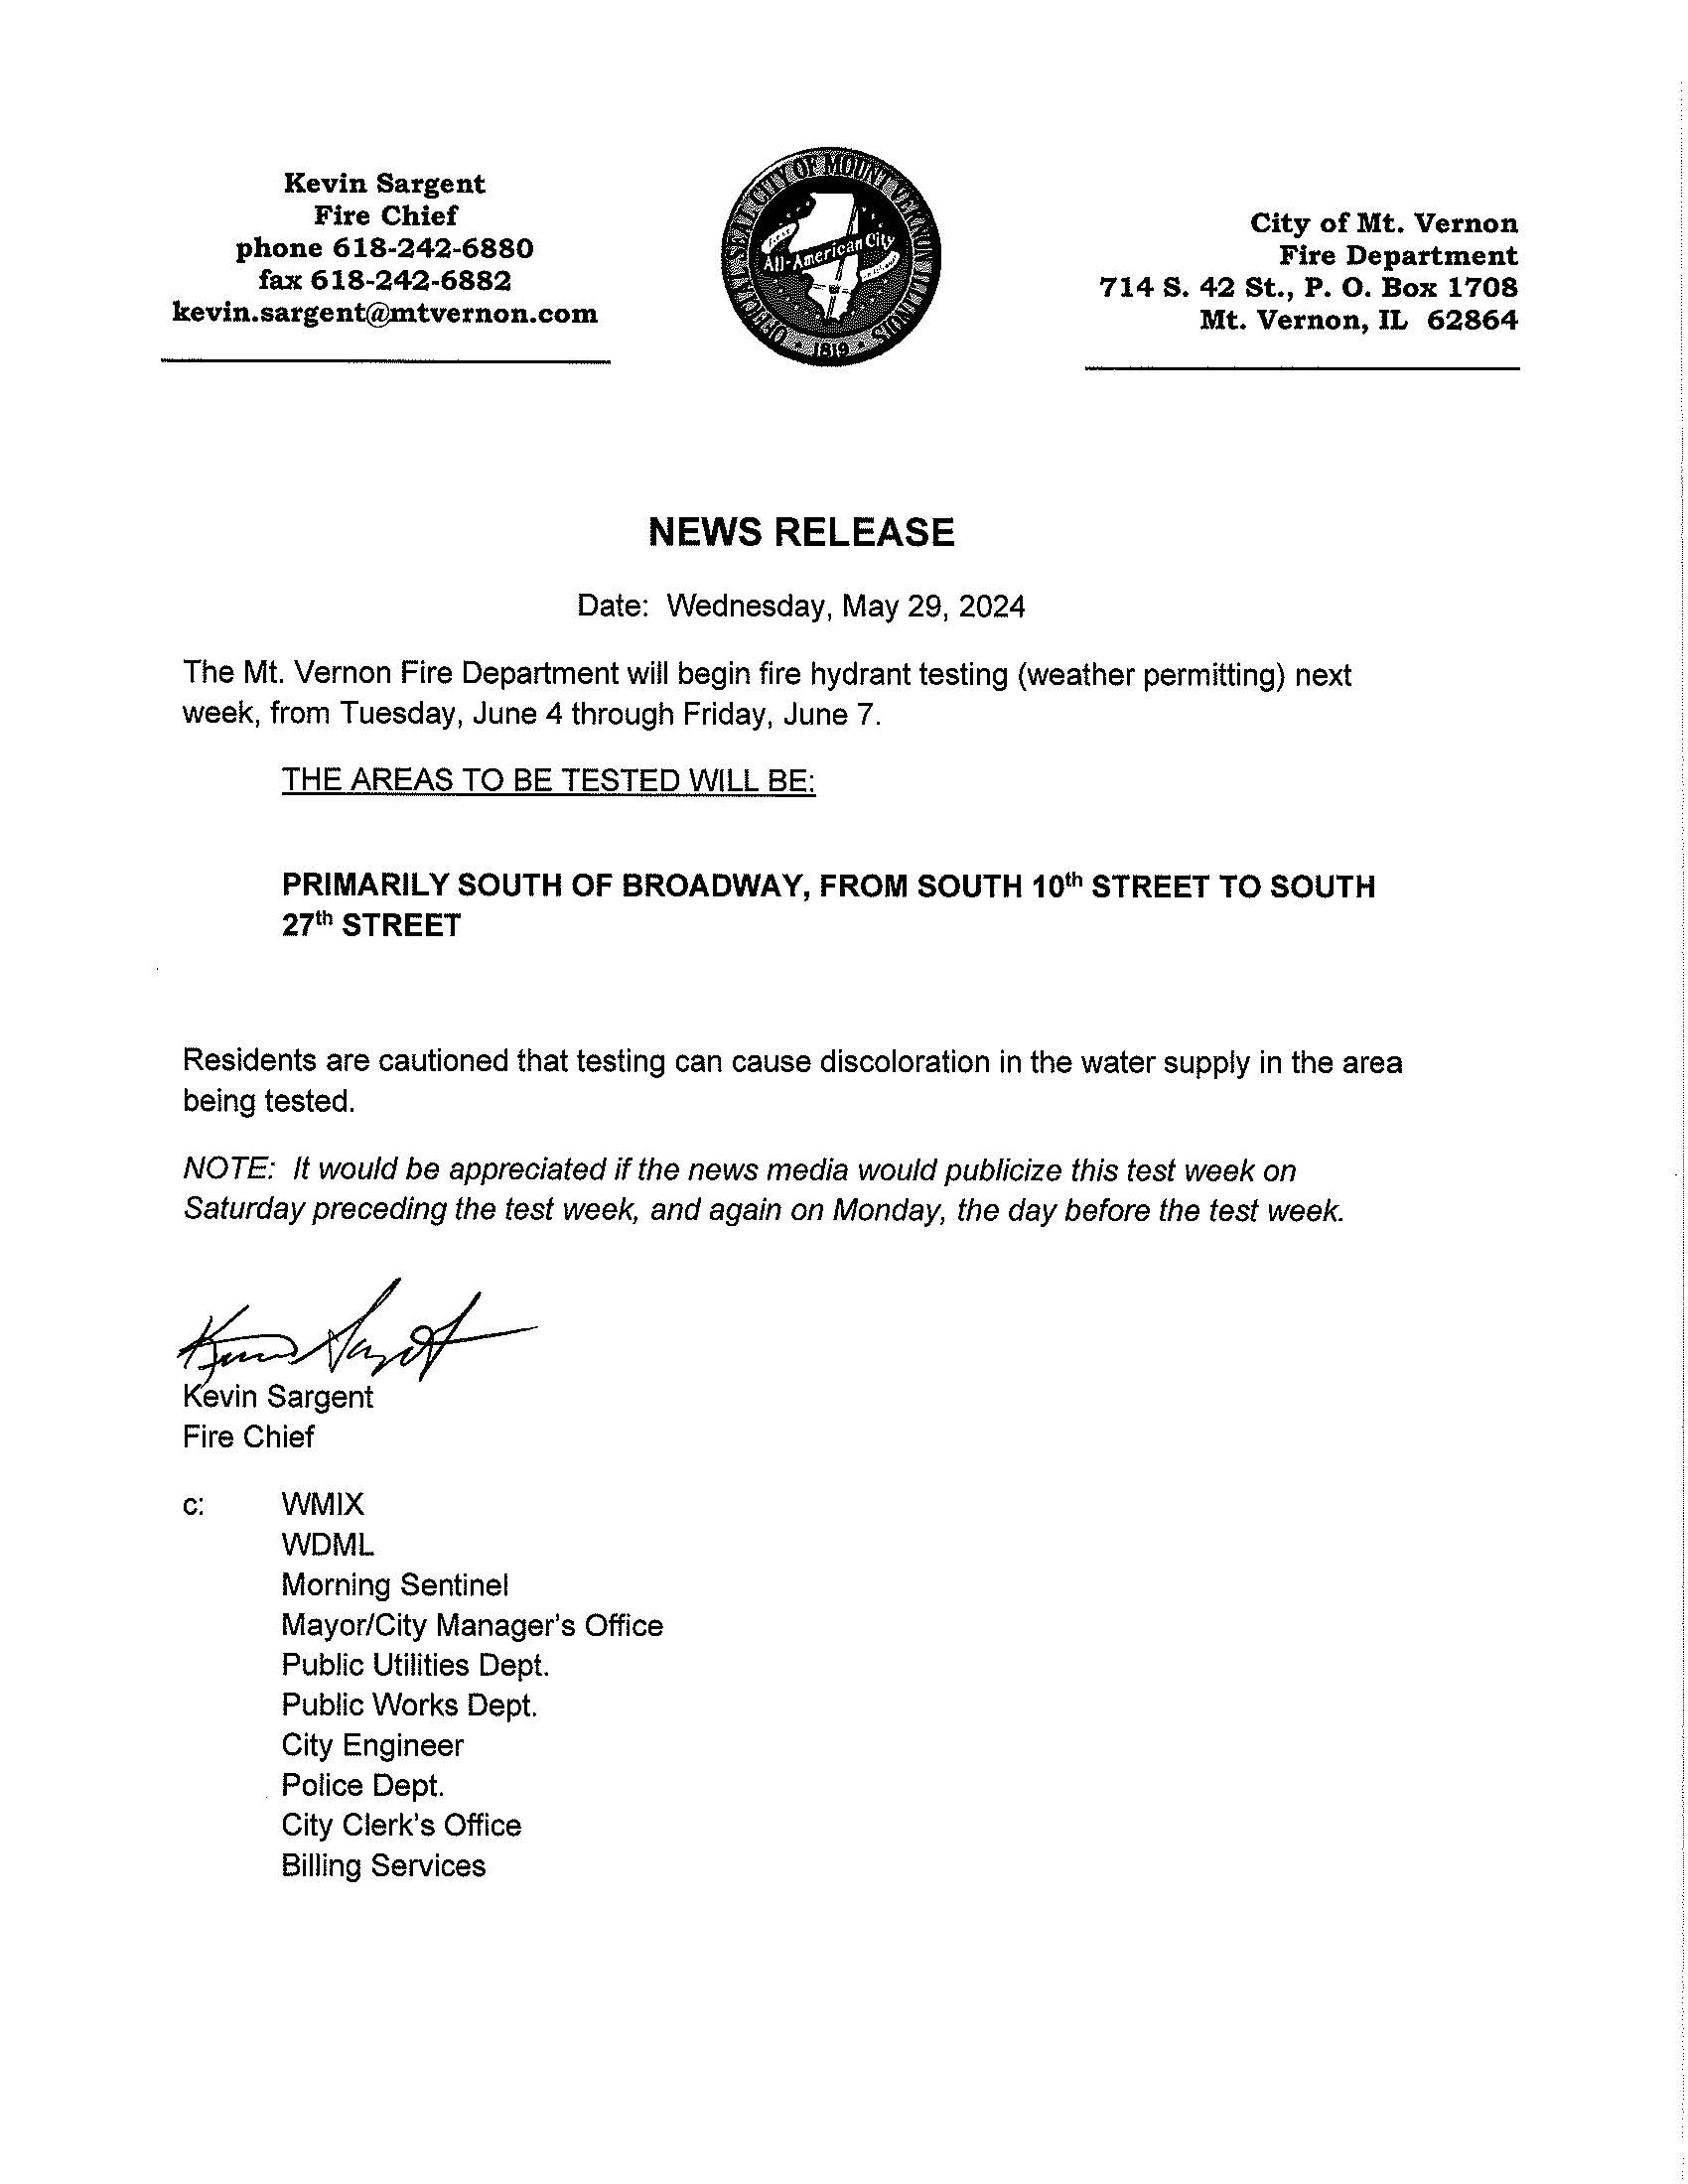 News release of fire hydrant testing